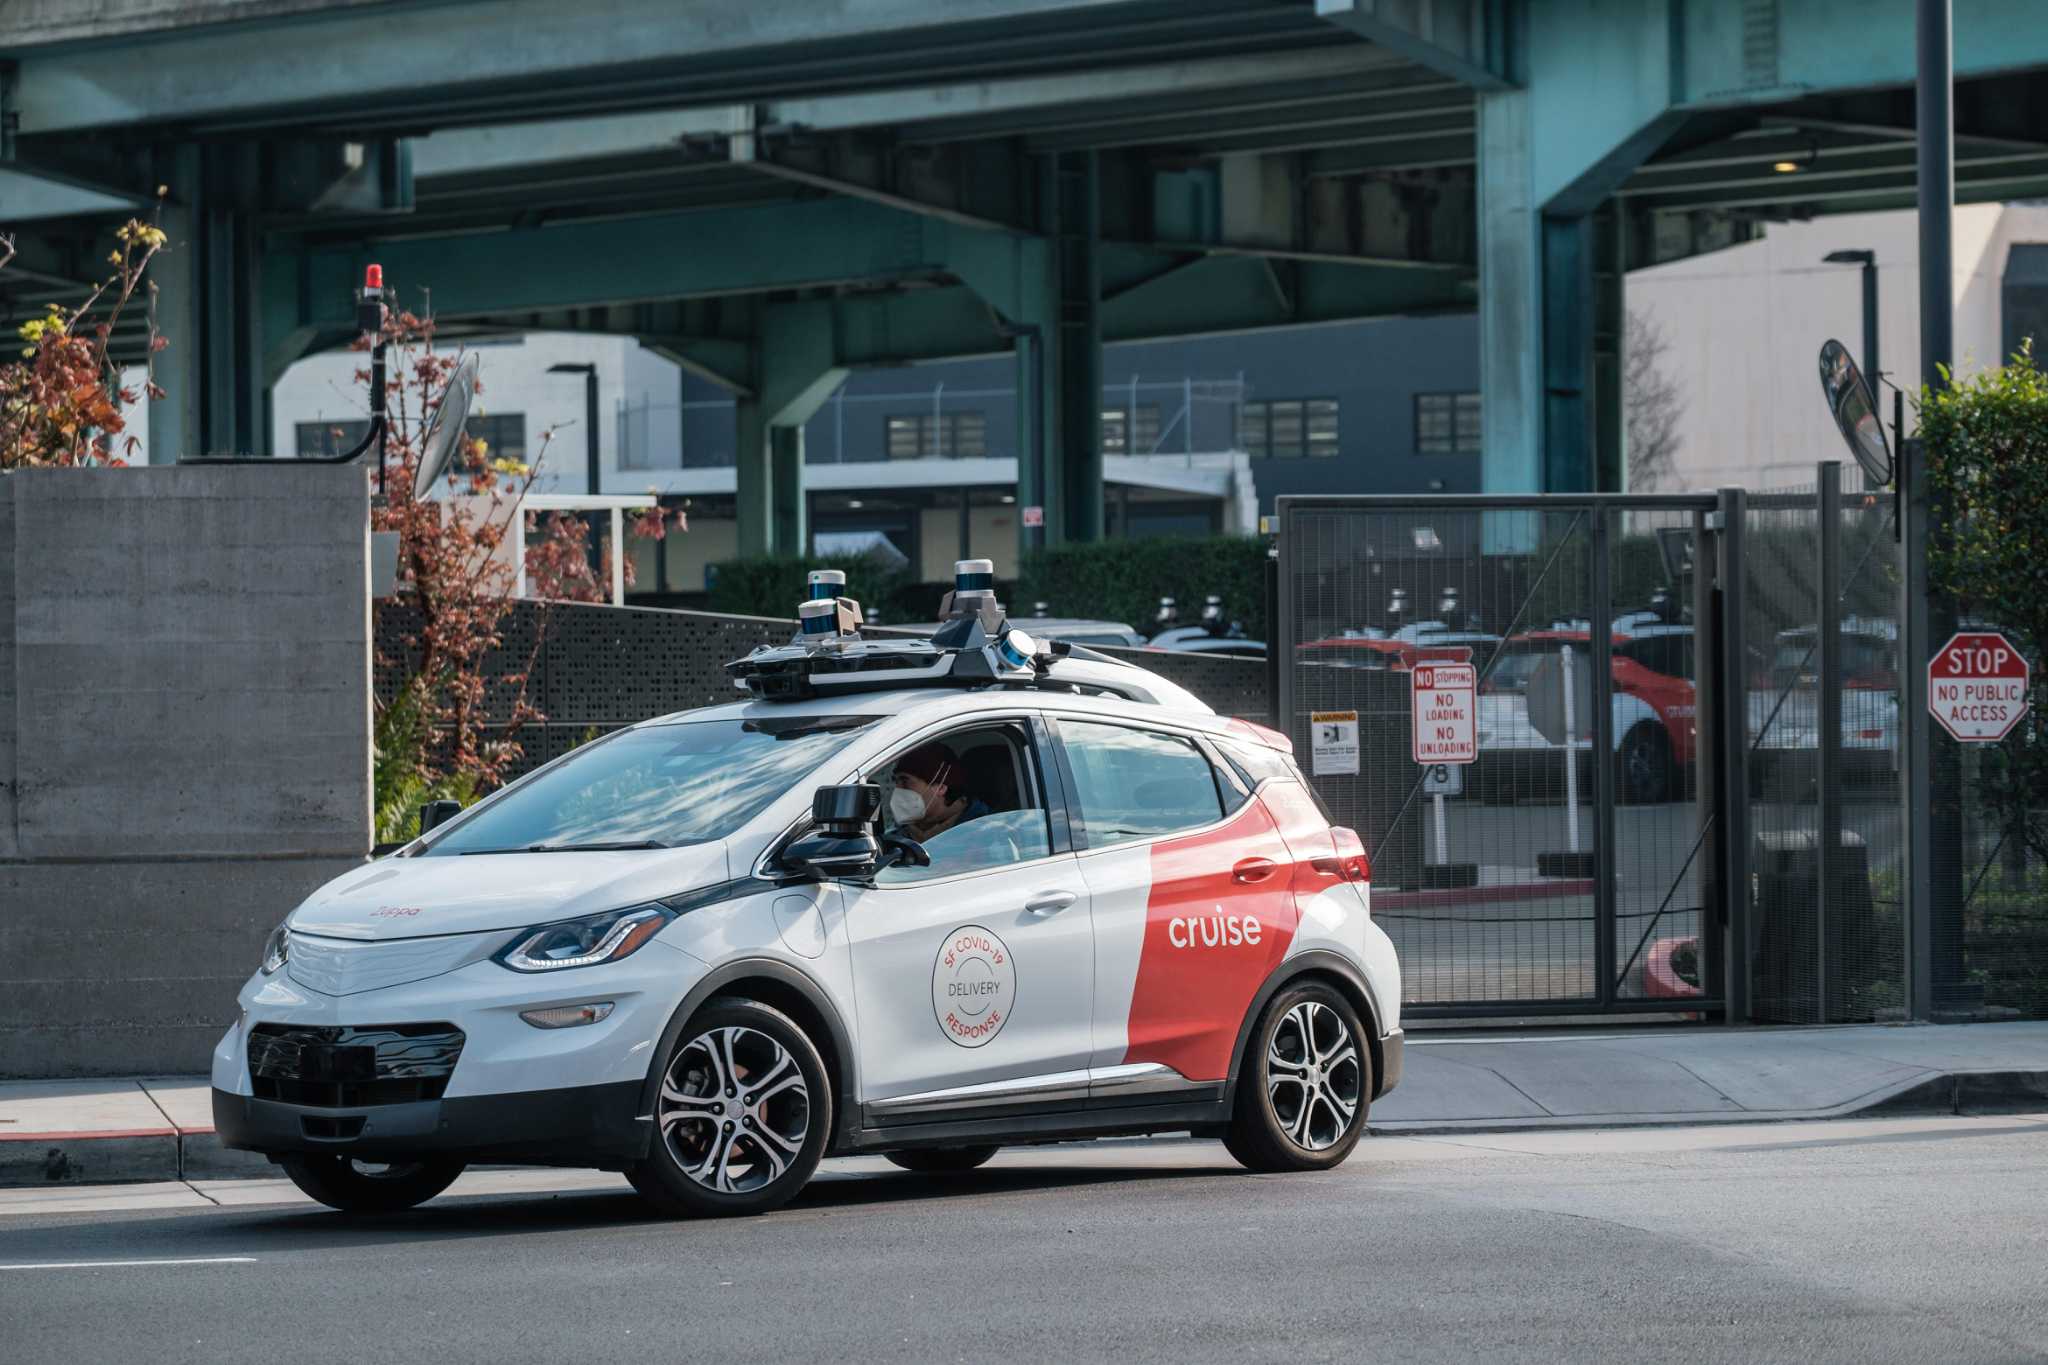 Cruise's Driverless Taxi Service in San Francisco Is Suspended - The New  York Times